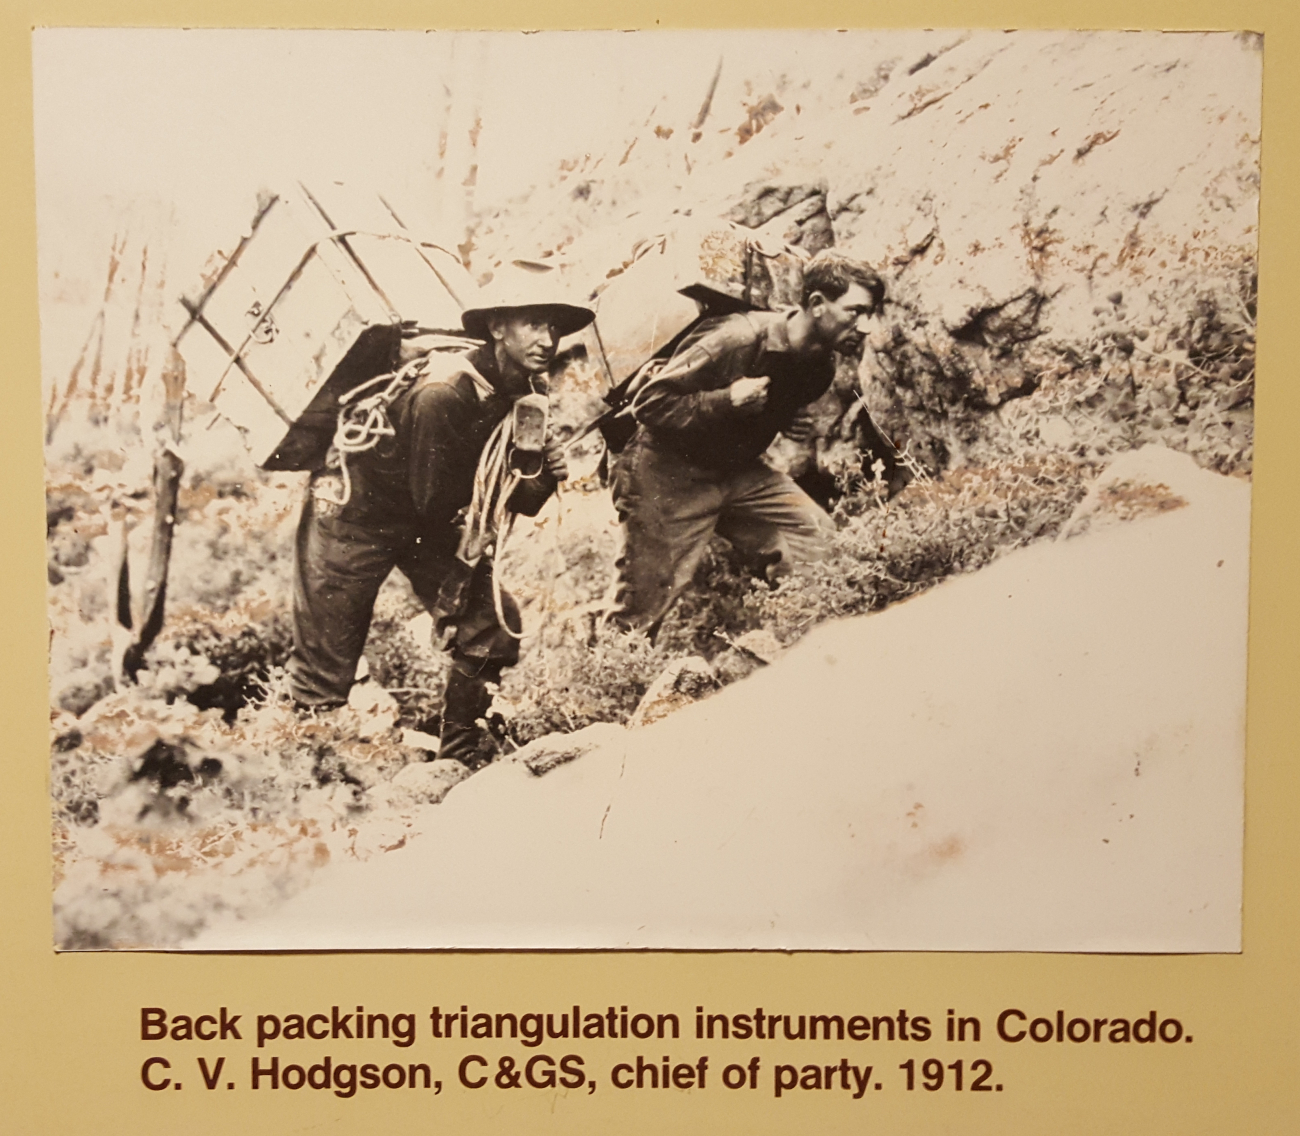 Backpacking triangulation instruments in Colorado